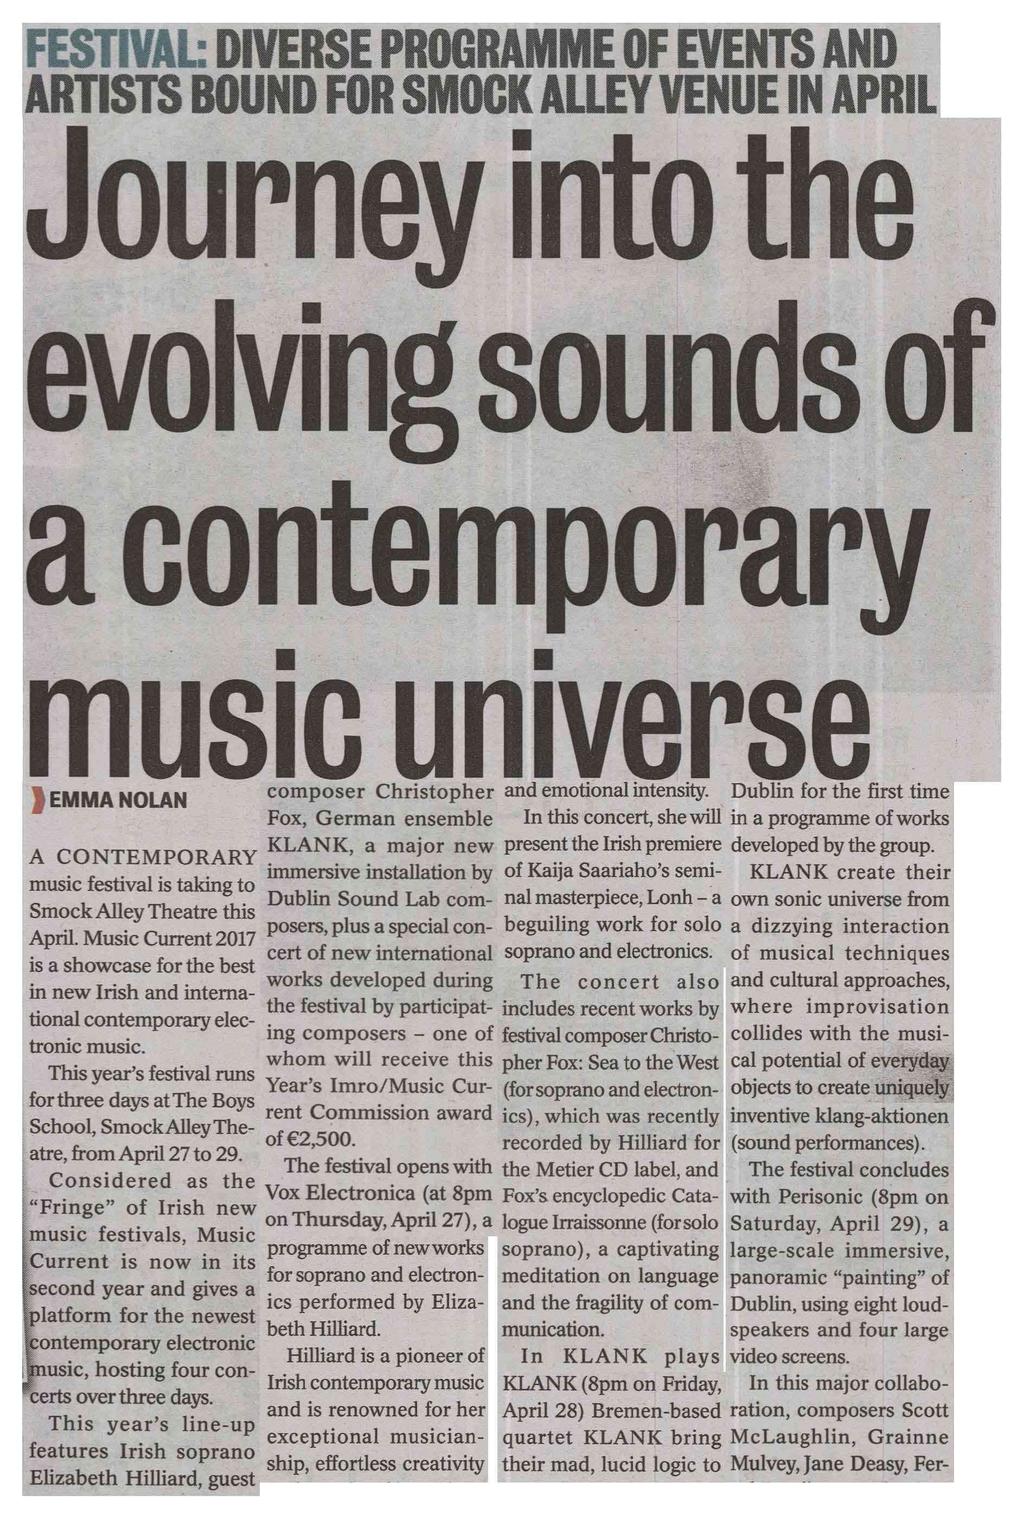 Clondalkin Gazette* -15- Area of Clip: 78100mm² Page 1 of 3 FESTIVAL DIVERSE PROGRAMME OF EVENTS AND ARTISTS BOUND FOR SMOCK ALLEY VENUE IN APRIL Journey into the evolving sounds of a contemporary